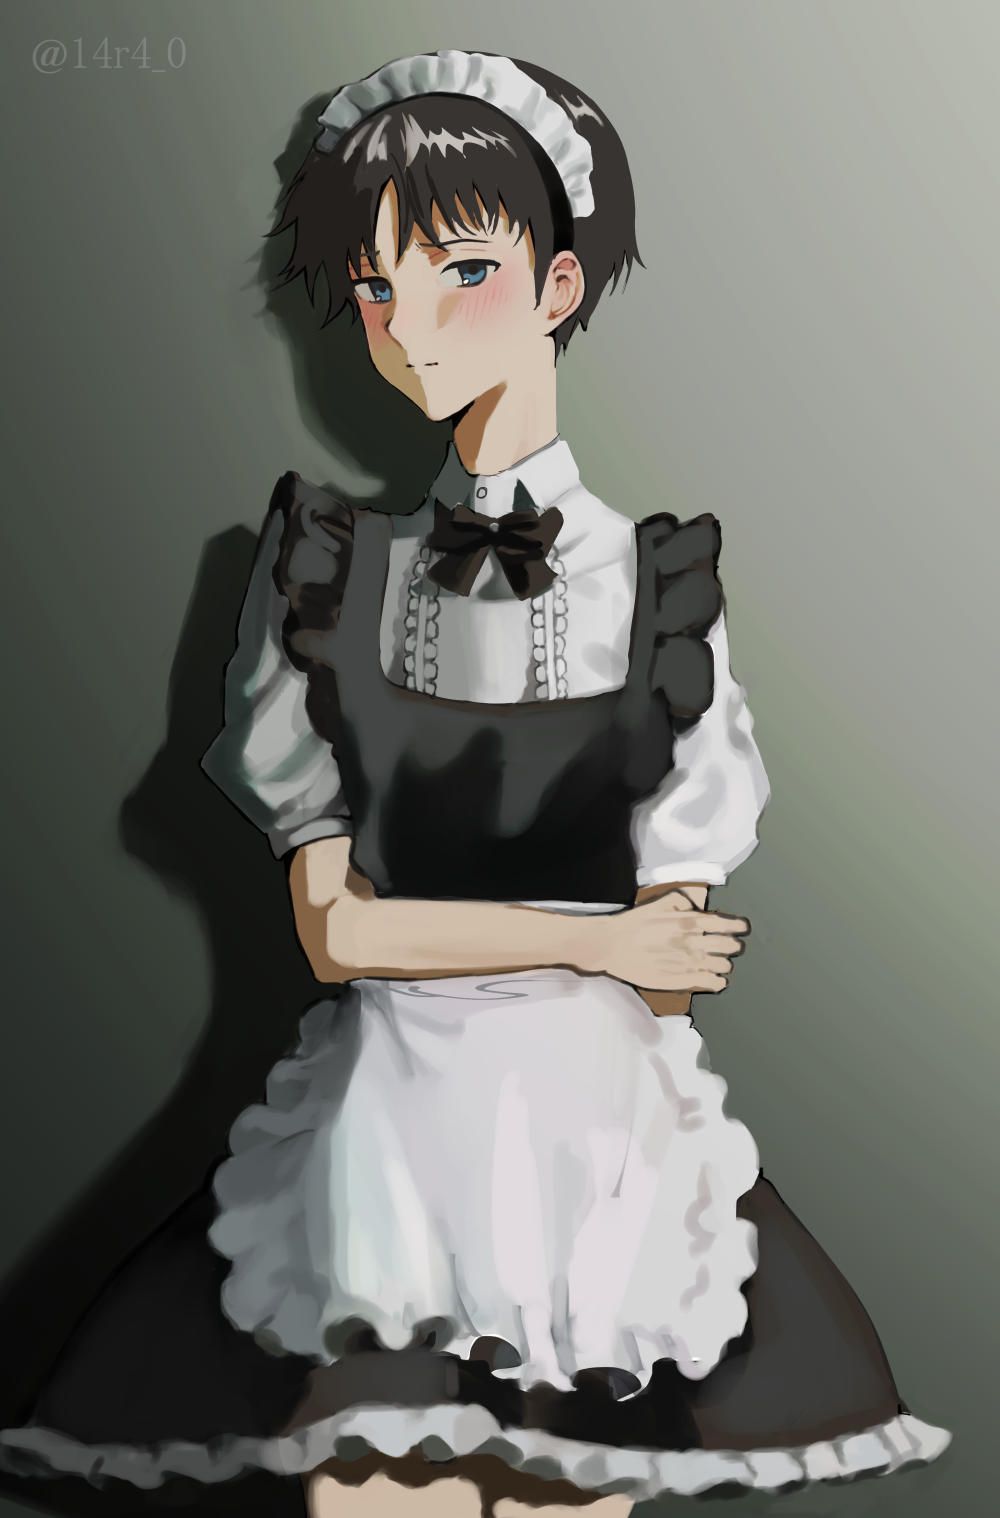 Neon Genesis Evangelion Anime Boys 2D Vertical Short Hair Maid Outfit  Looking At Viewer Blue Eyes Bl Wallpaper - Resolution:1000x1518 - ID:472872  